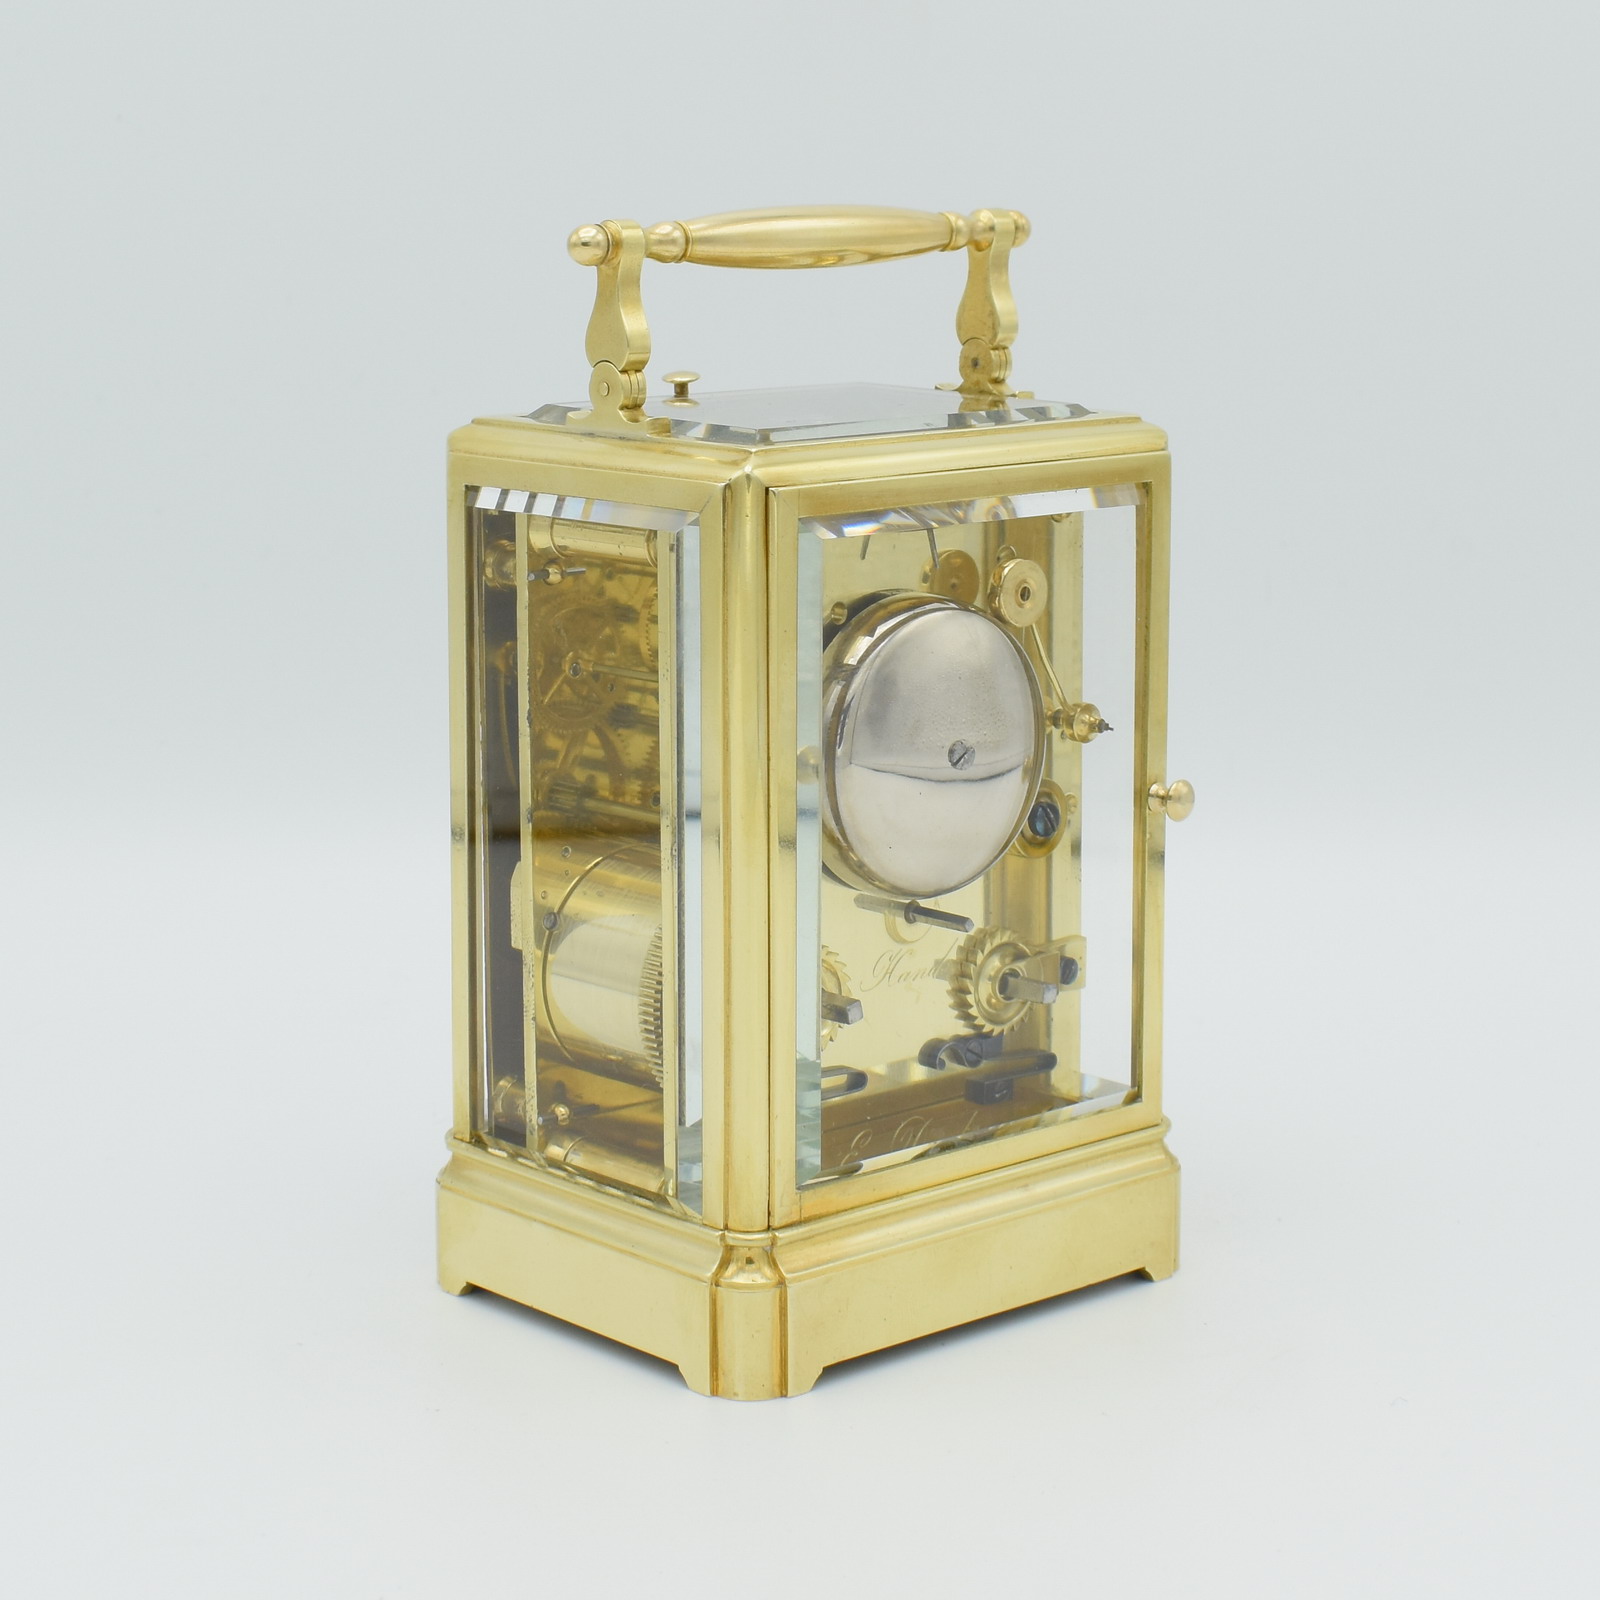 E. Dent Carriage Clock – It's About Time